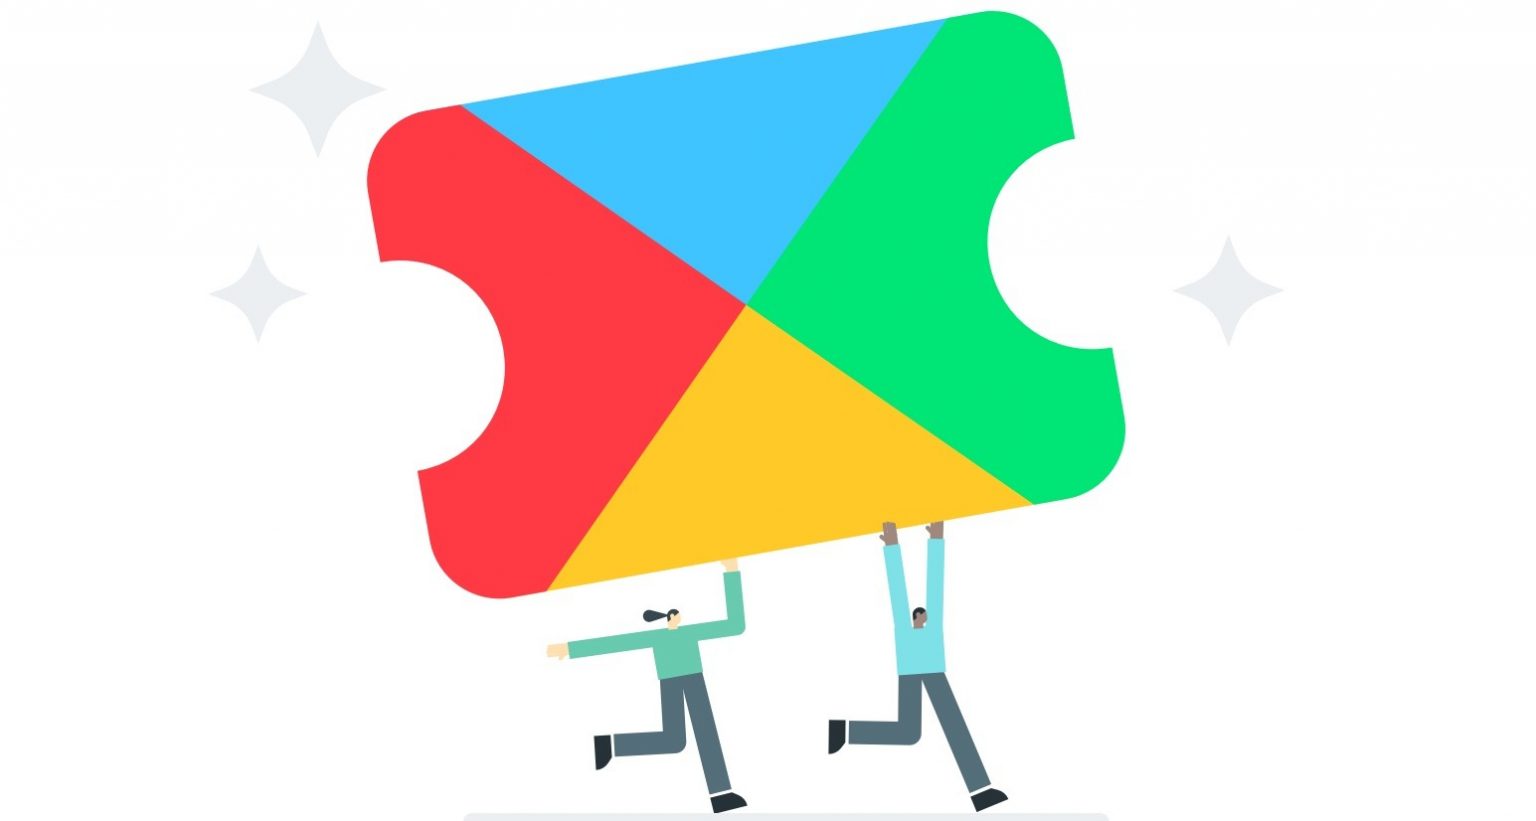 Google Play Pass subscription service offers over 350 apps and games